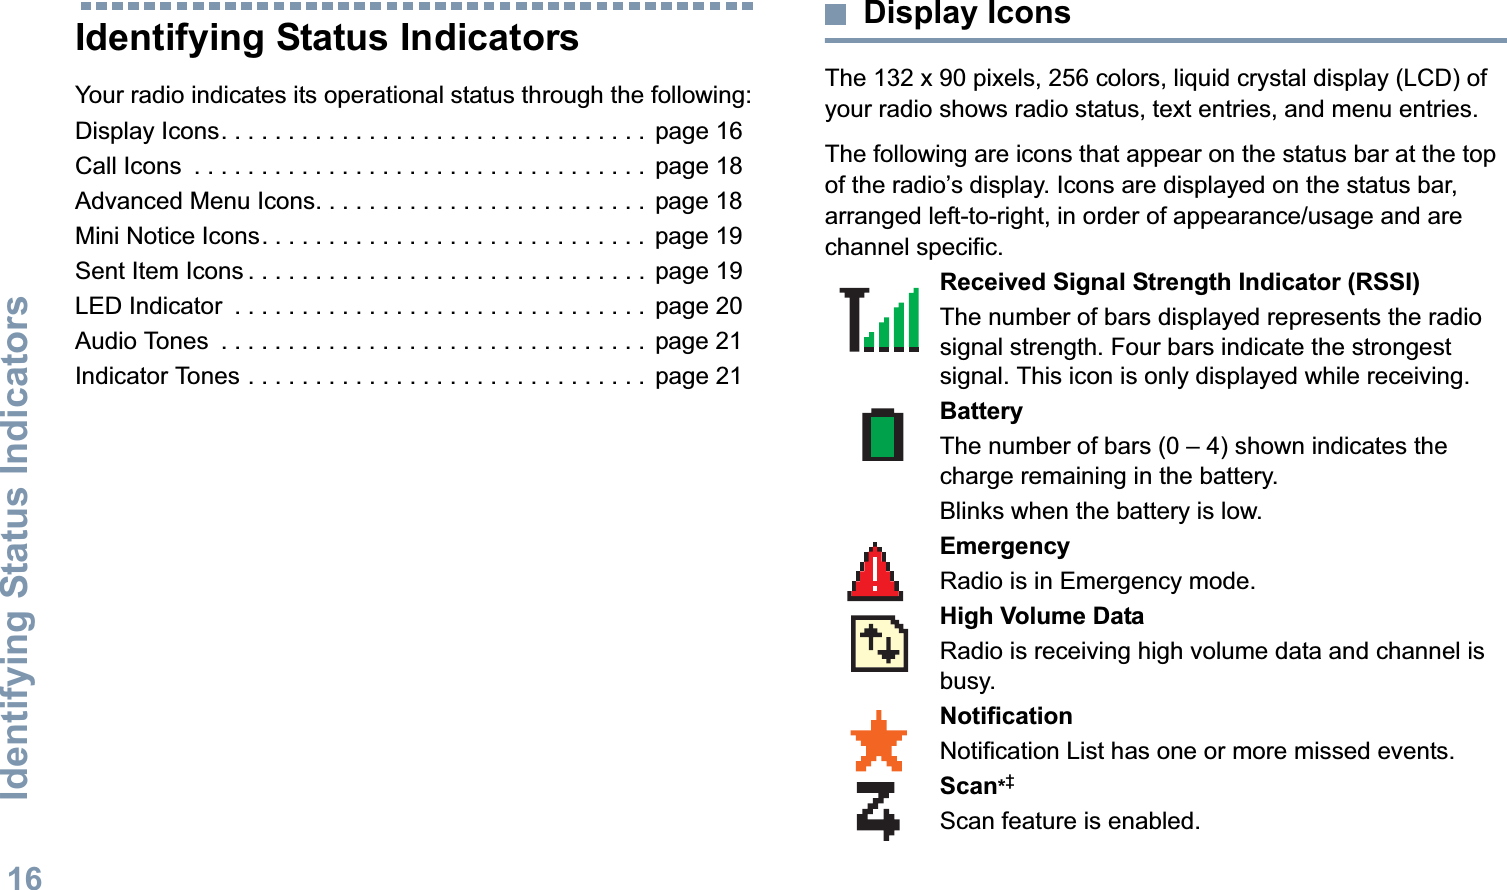 Identifying Status IndicatorsEnglish16Identifying Status IndicatorsYour radio indicates its operational status through the following:Display Icons. . . . . . . . . . . . . . . . . . . . . . . . . . . . . . . .  page 16Call Icons  . . . . . . . . . . . . . . . . . . . . . . . . . . . . . . . . . .  page 18Advanced Menu Icons. . . . . . . . . . . . . . . . . . . . . . . . .  page 18Mini Notice Icons. . . . . . . . . . . . . . . . . . . . . . . . . . . . .  page 19Sent Item Icons . . . . . . . . . . . . . . . . . . . . . . . . . . . . . .  page 19LED Indicator  . . . . . . . . . . . . . . . . . . . . . . . . . . . . . . .  page 20Audio Tones  . . . . . . . . . . . . . . . . . . . . . . . . . . . . . . . .  page 21Indicator Tones . . . . . . . . . . . . . . . . . . . . . . . . . . . . . .  page 21Display IconsThe 132 x 90 pixels, 256 colors, liquid crystal display (LCD) of your radio shows radio status, text entries, and menu entries.The following are icons that appear on the status bar at the top of the radio’s display. Icons are displayed on the status bar, arranged left-to-right, in order of appearance/usage and are channel specific.      Received Signal Strength Indicator (RSSI)The number of bars displayed represents the radio signal strength. Four bars indicate the strongest signal. This icon is only displayed while receiving.BatteryThe number of bars (0 – 4) shown indicates the charge remaining in the battery.Blinks when the battery is low.EmergencyRadio is in Emergency mode.High Volume DataRadio is receiving high volume data and channel is busy.NotificationNotification List has one or more missed events.Scan*‡Scan feature is enabled. 